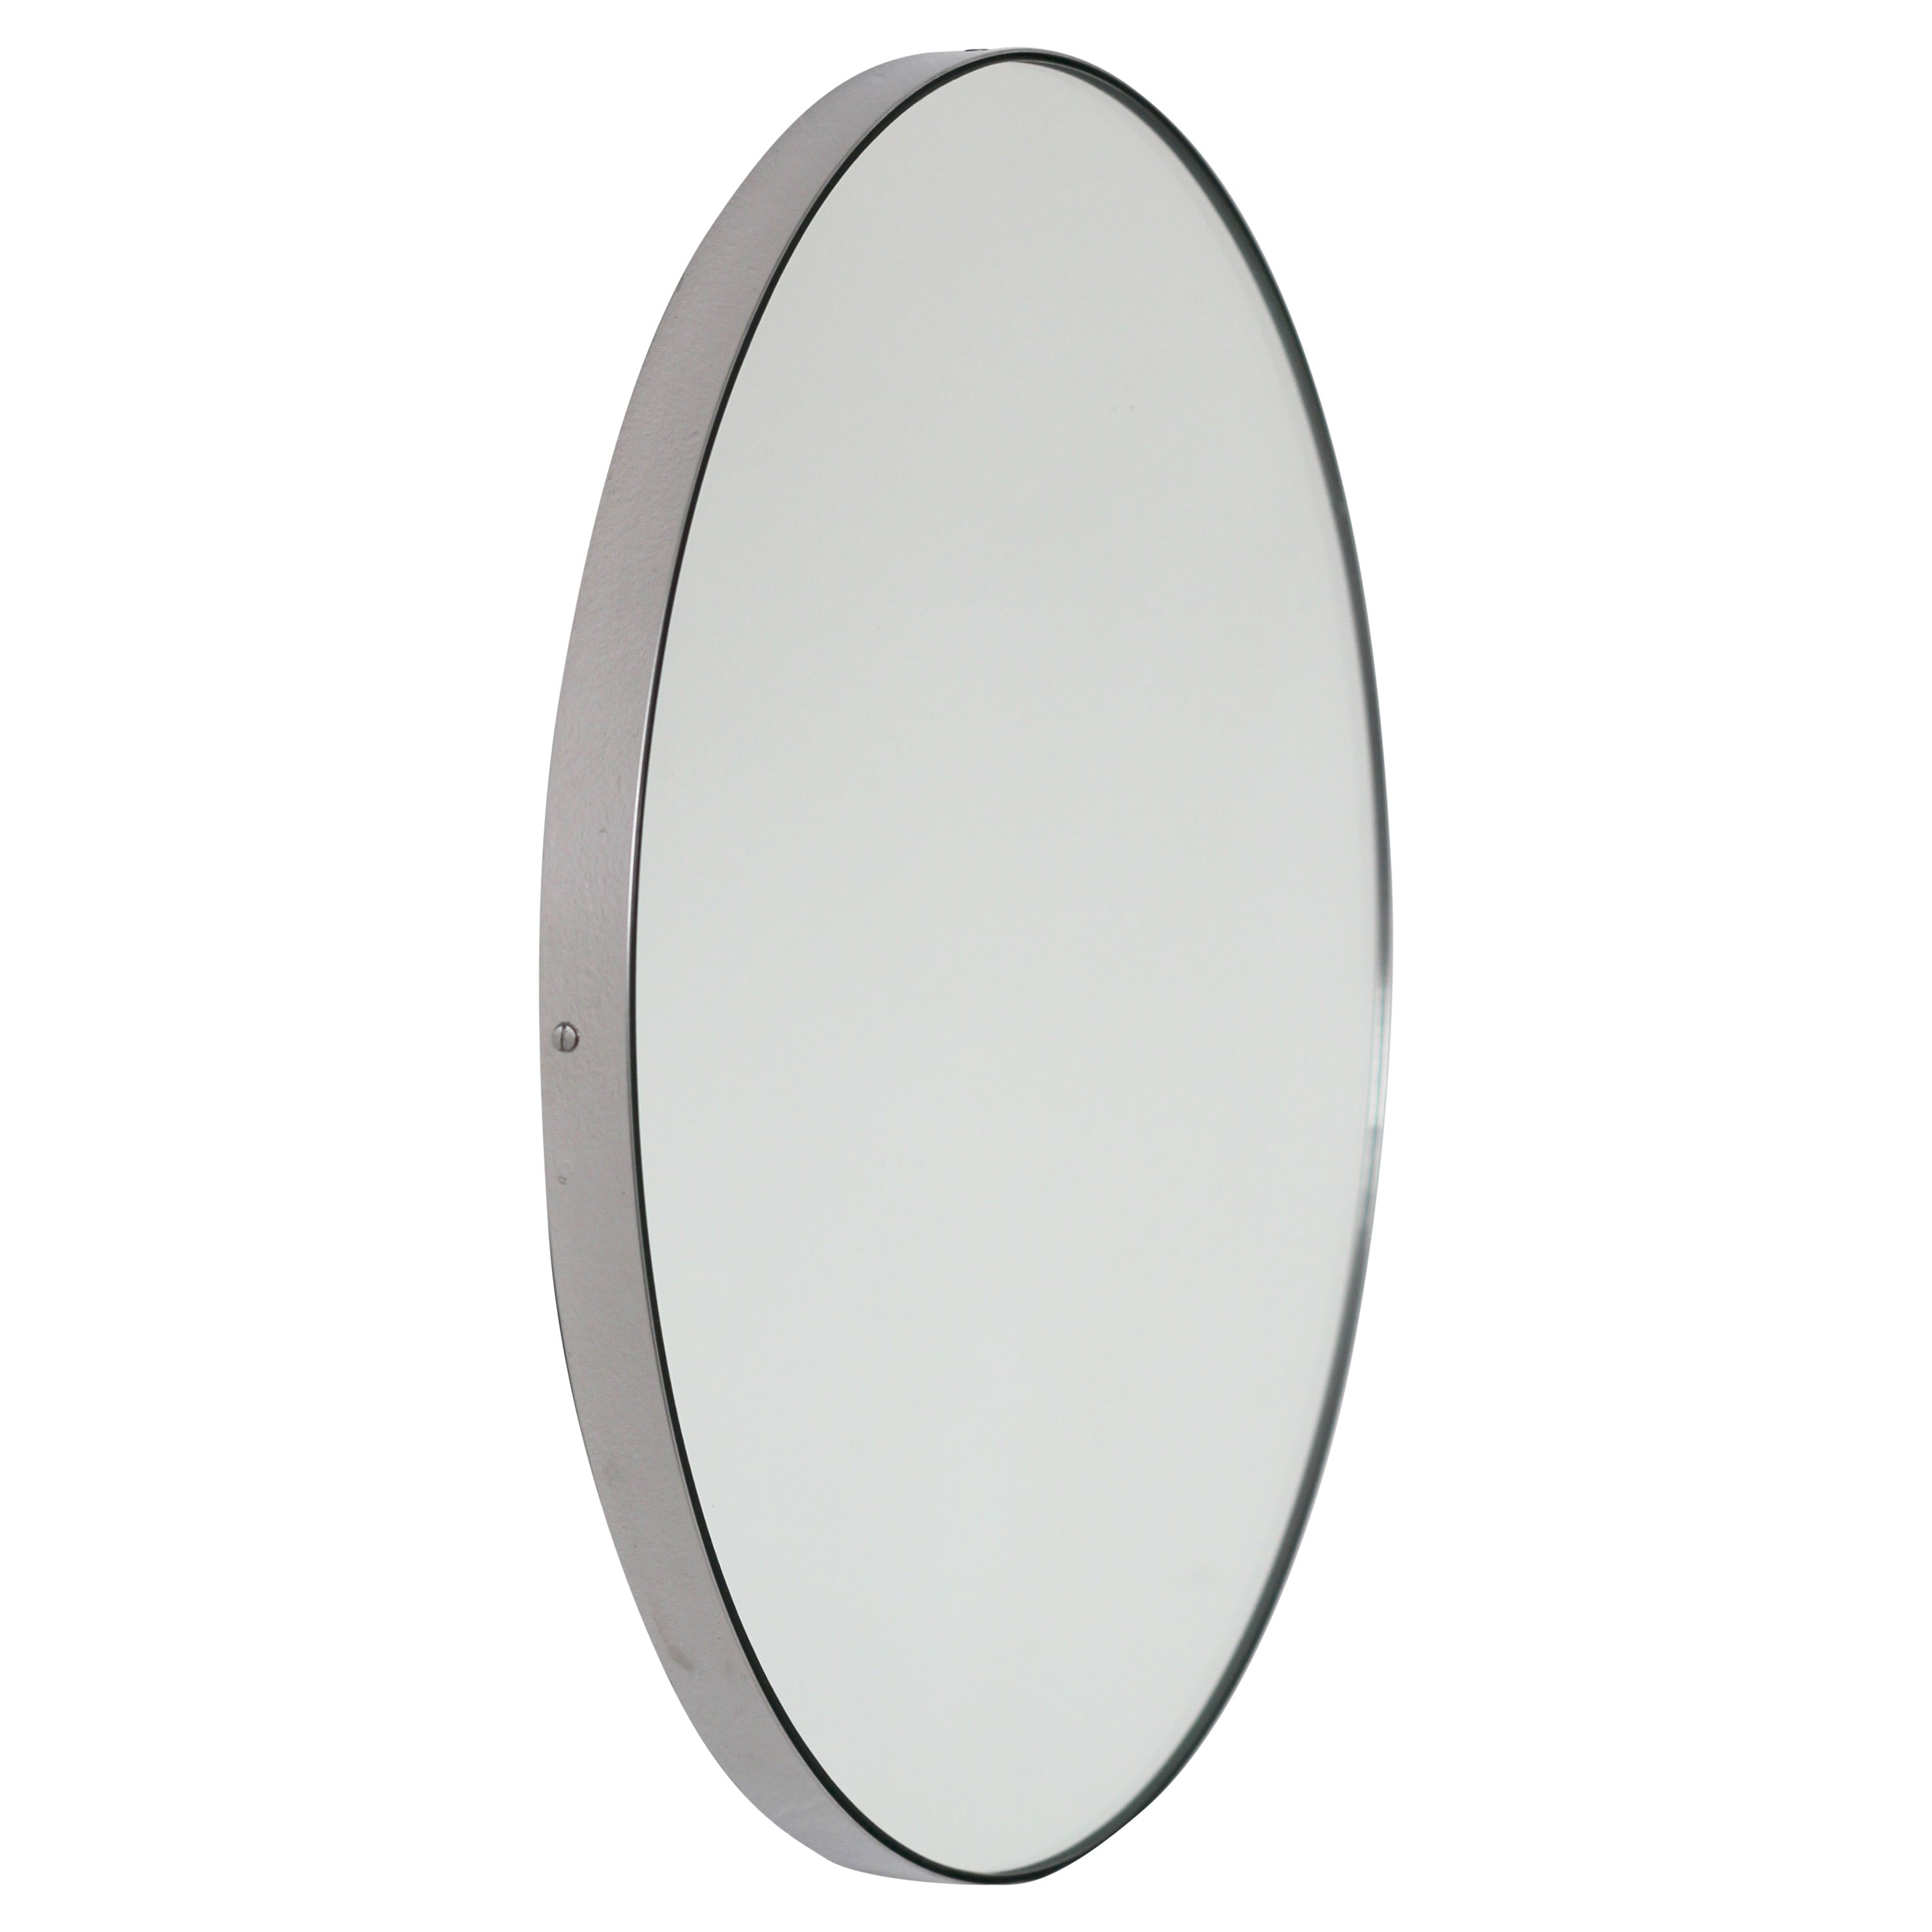 Orbis Round Handcrafted Mirror with Stainless Steel Frame, Large